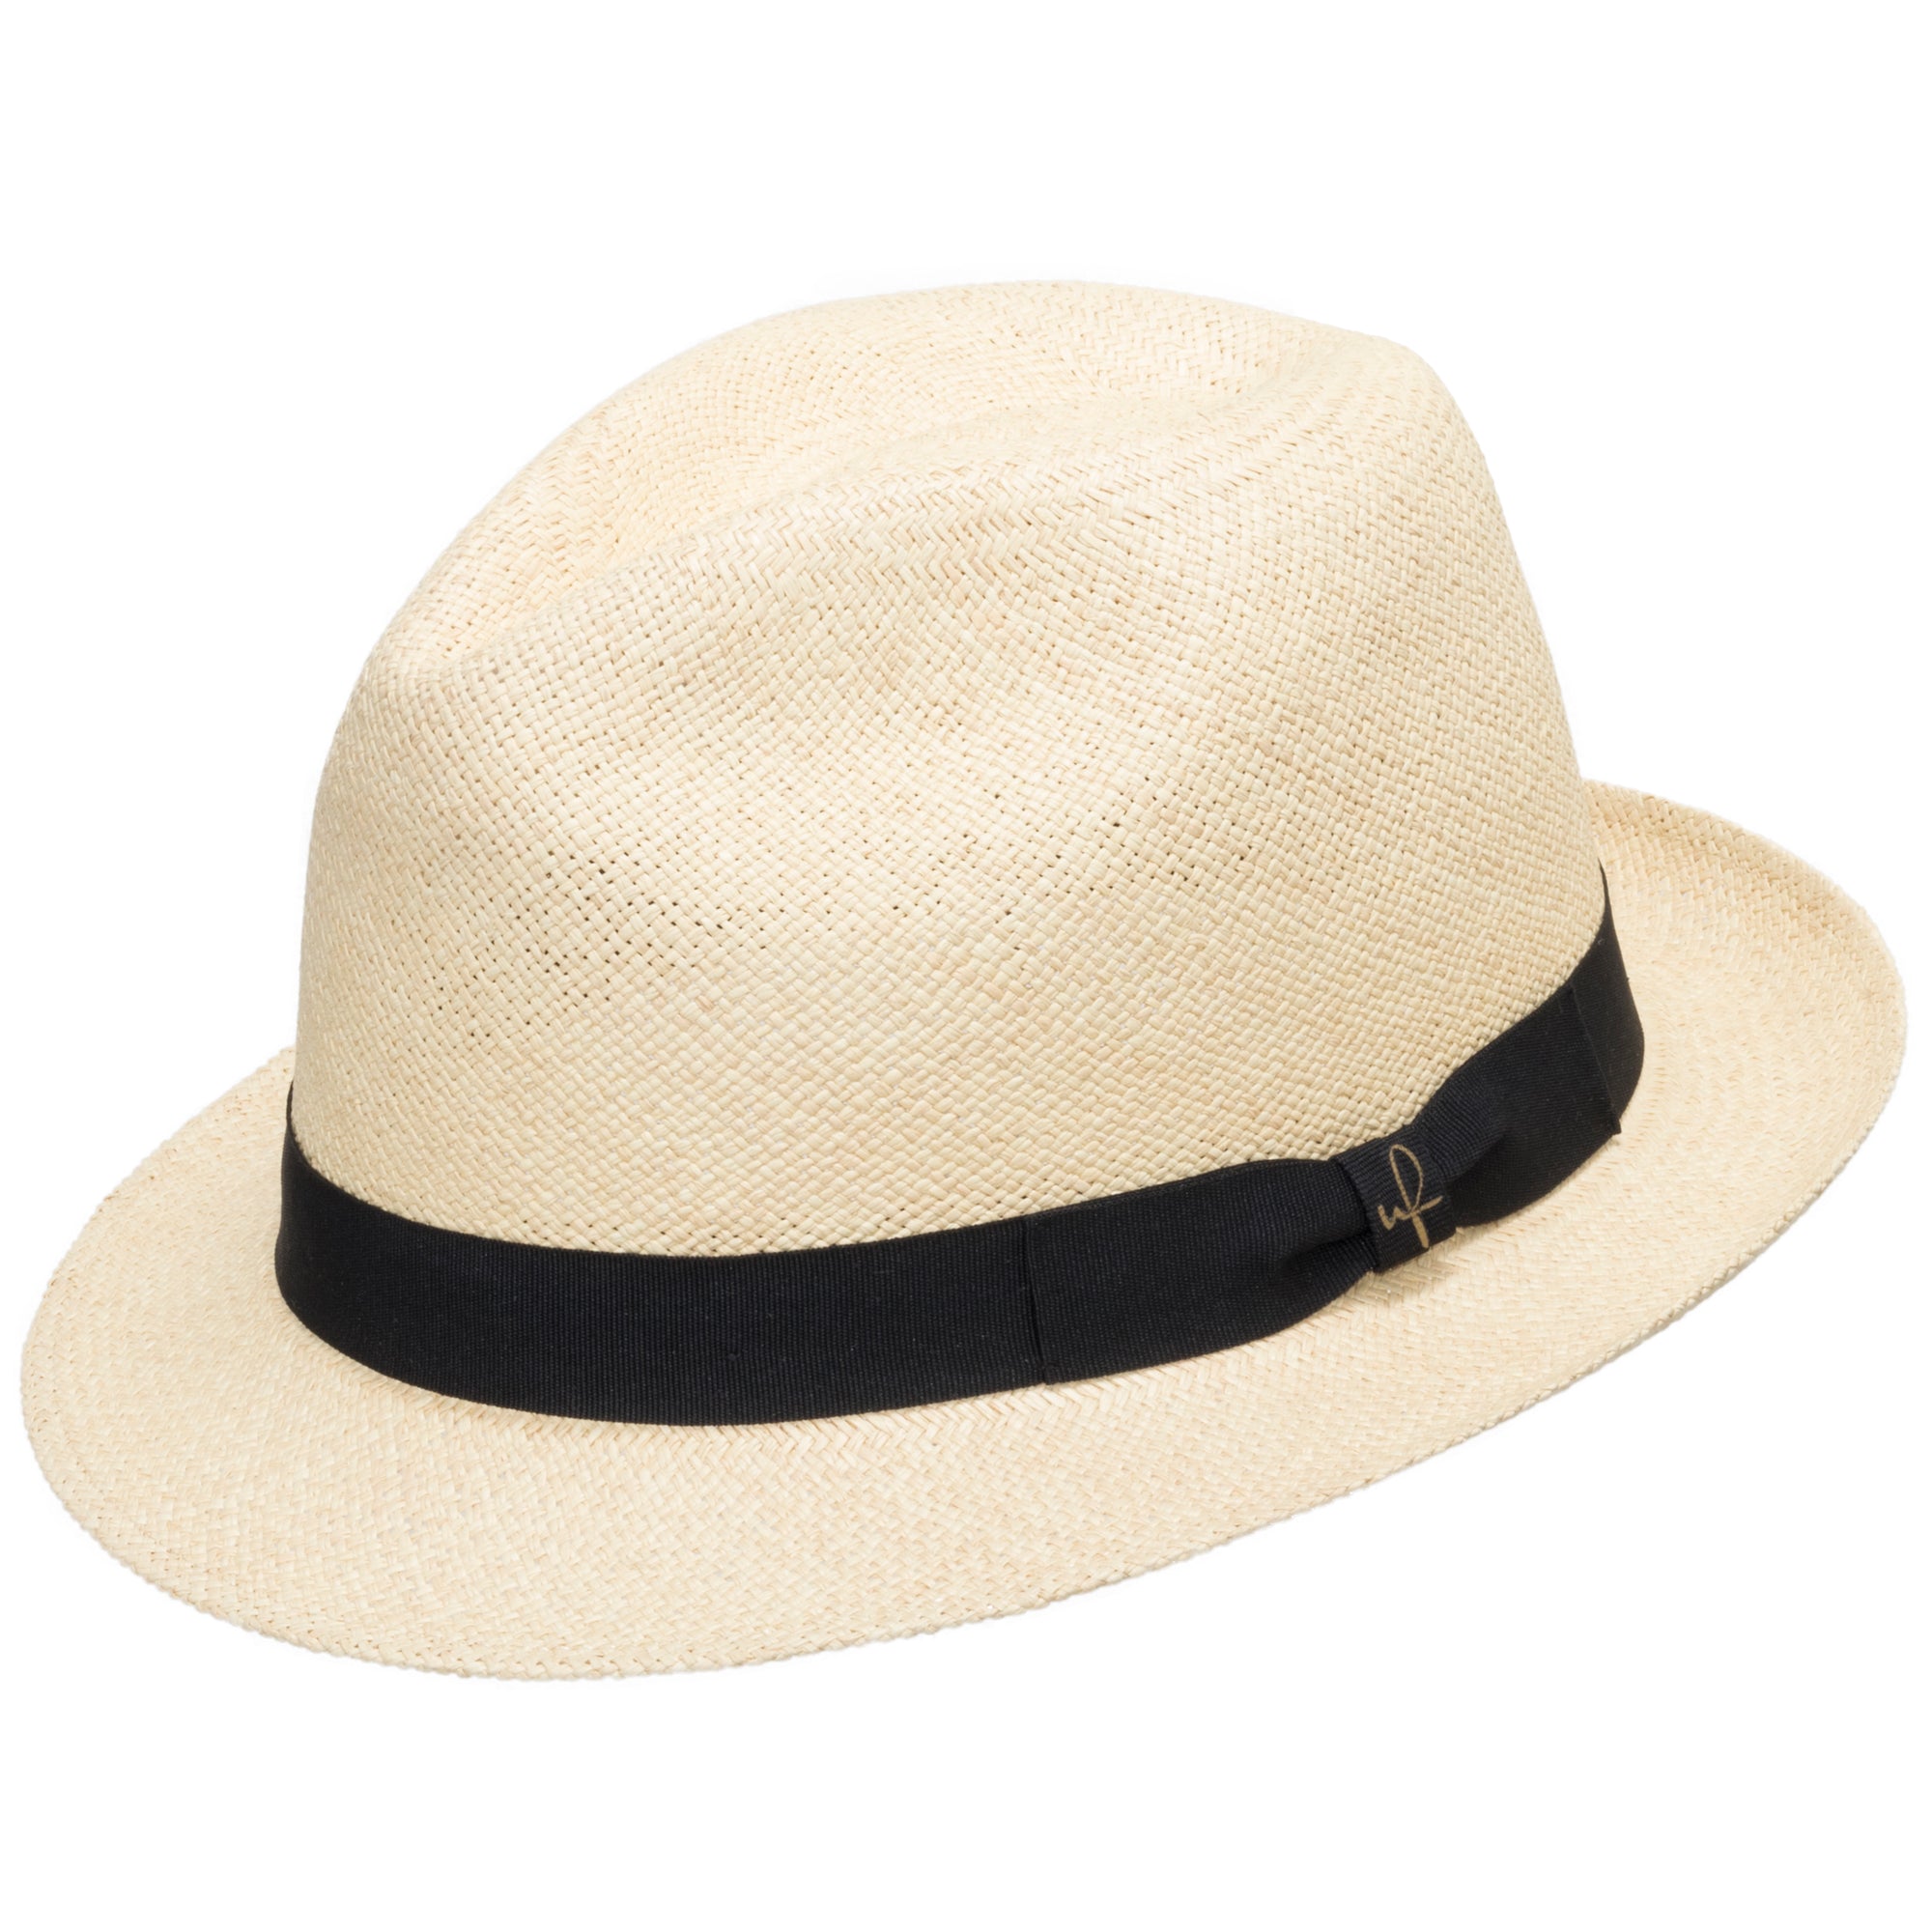 Panama Hat Mens  Shop The Finest Straw Hats From Ultrafino